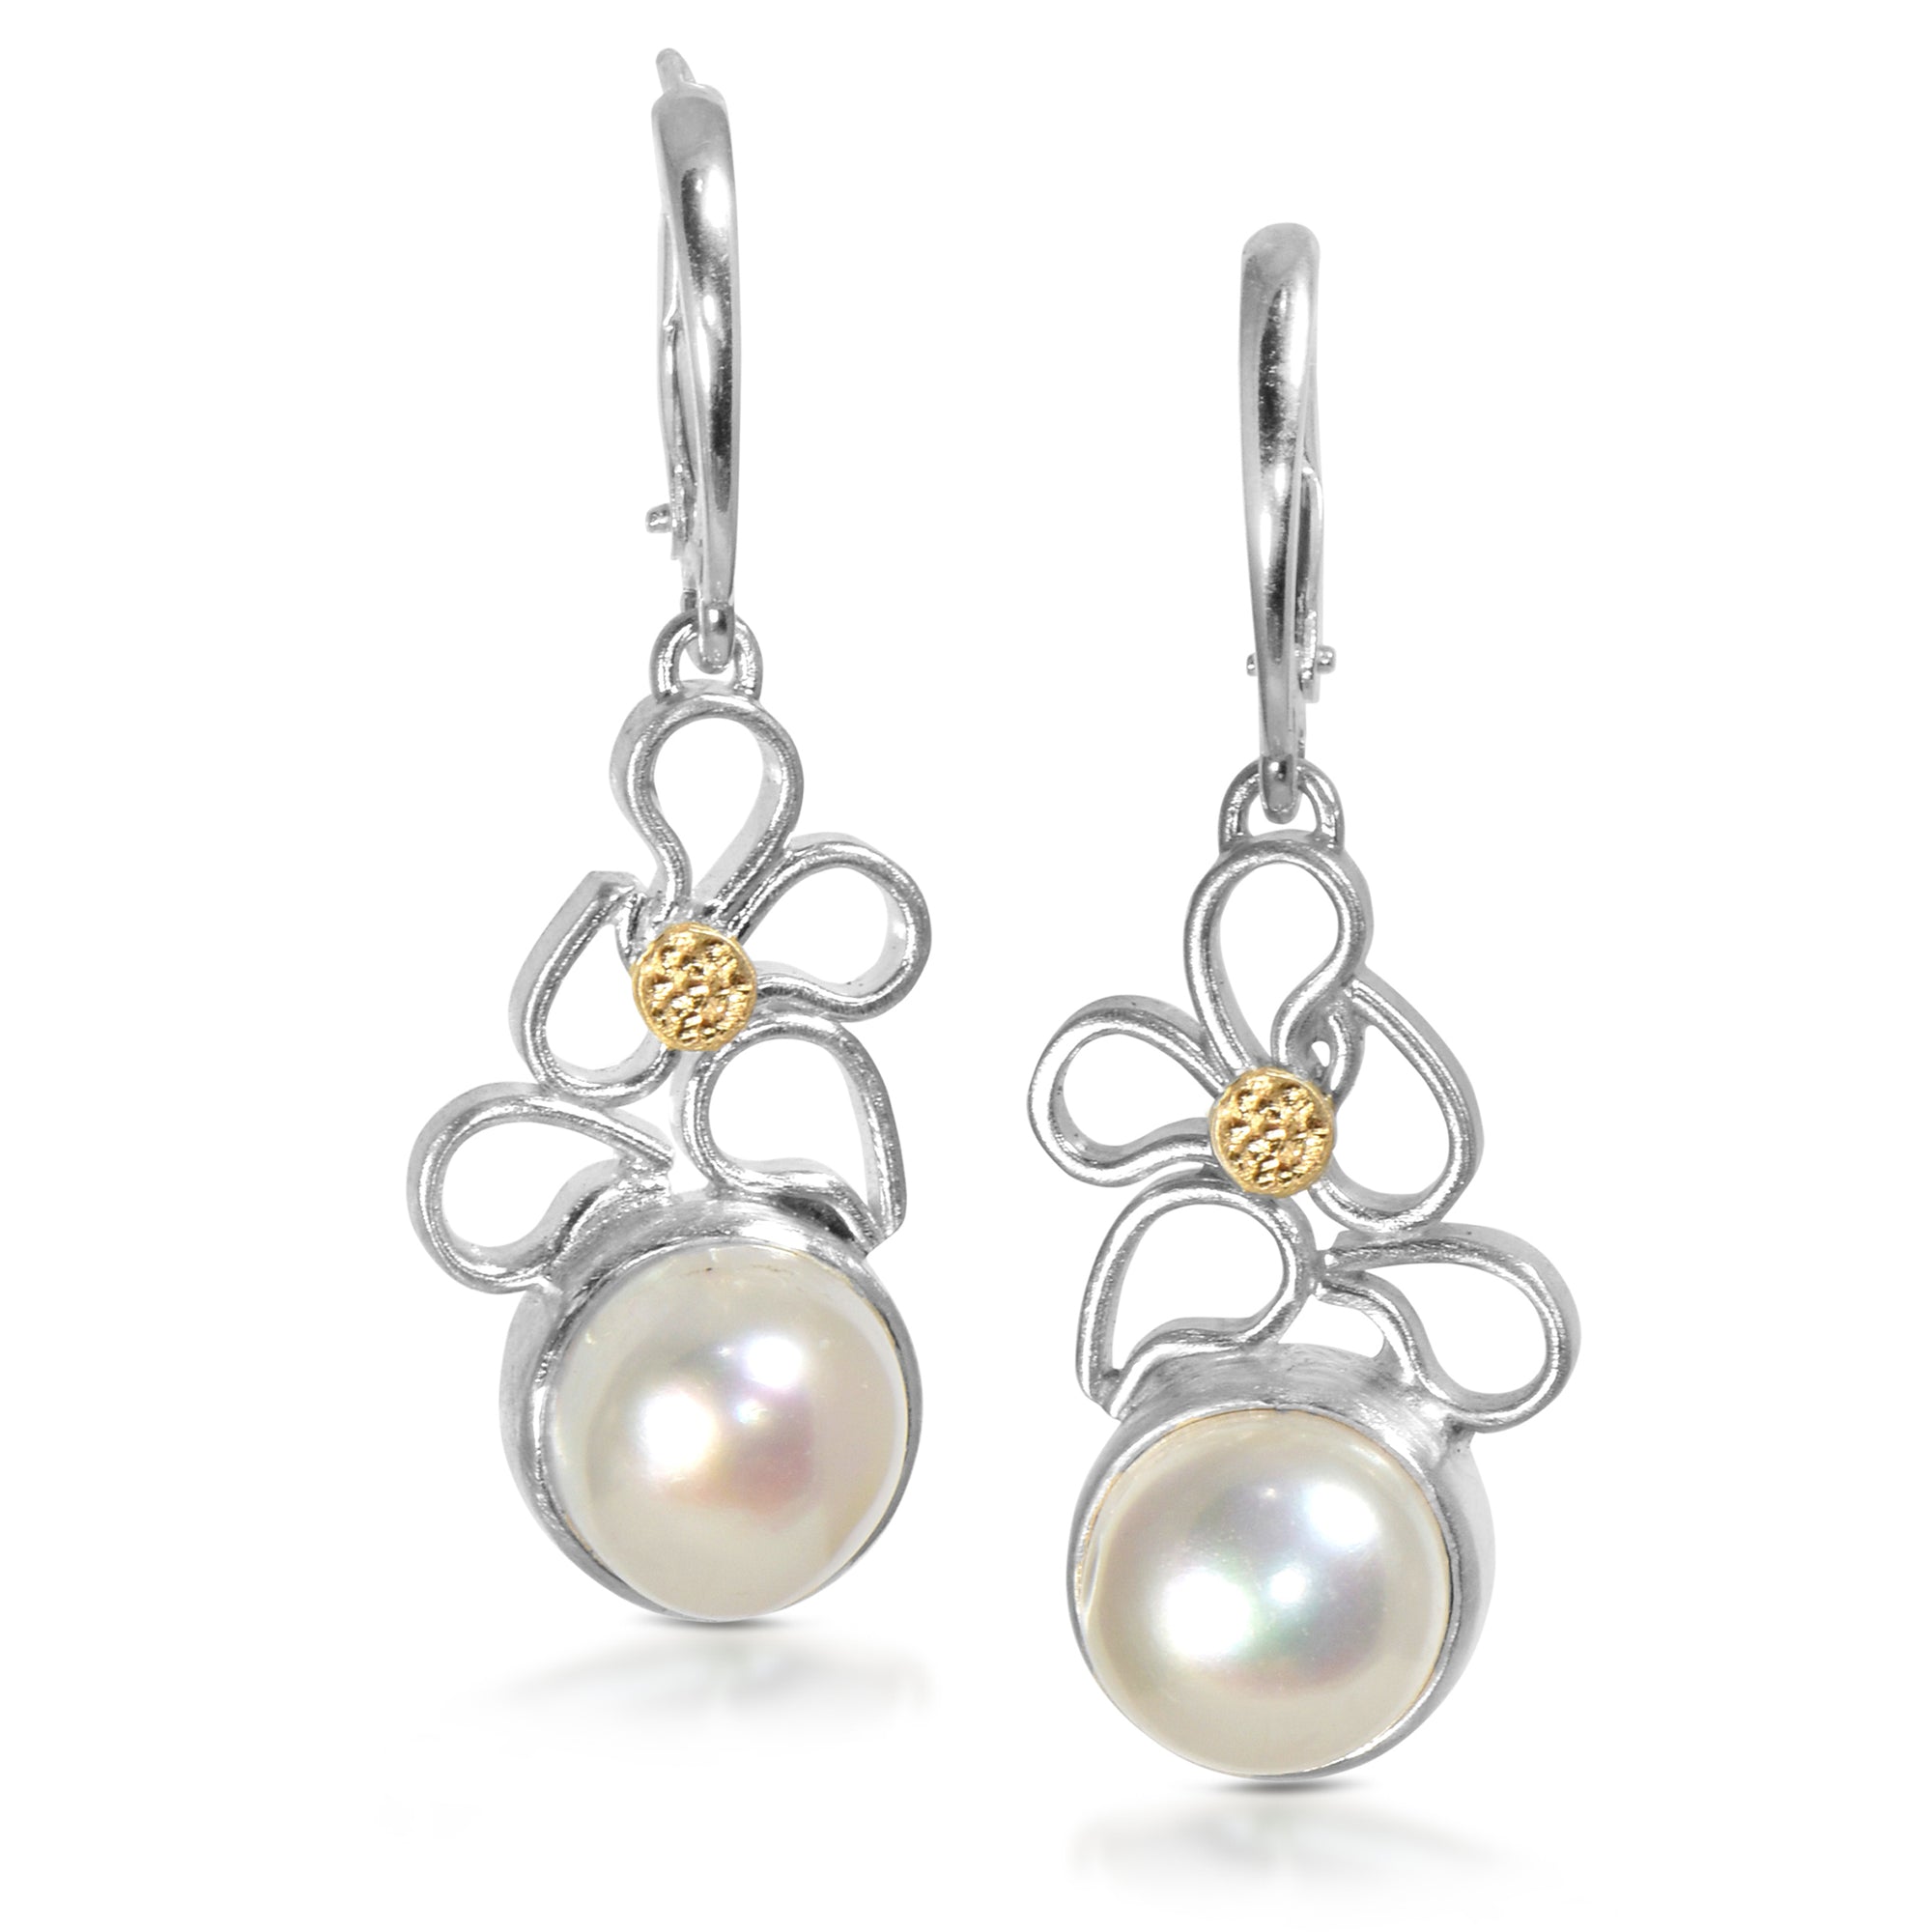 Mabe pearl argentium earrings with 18kt